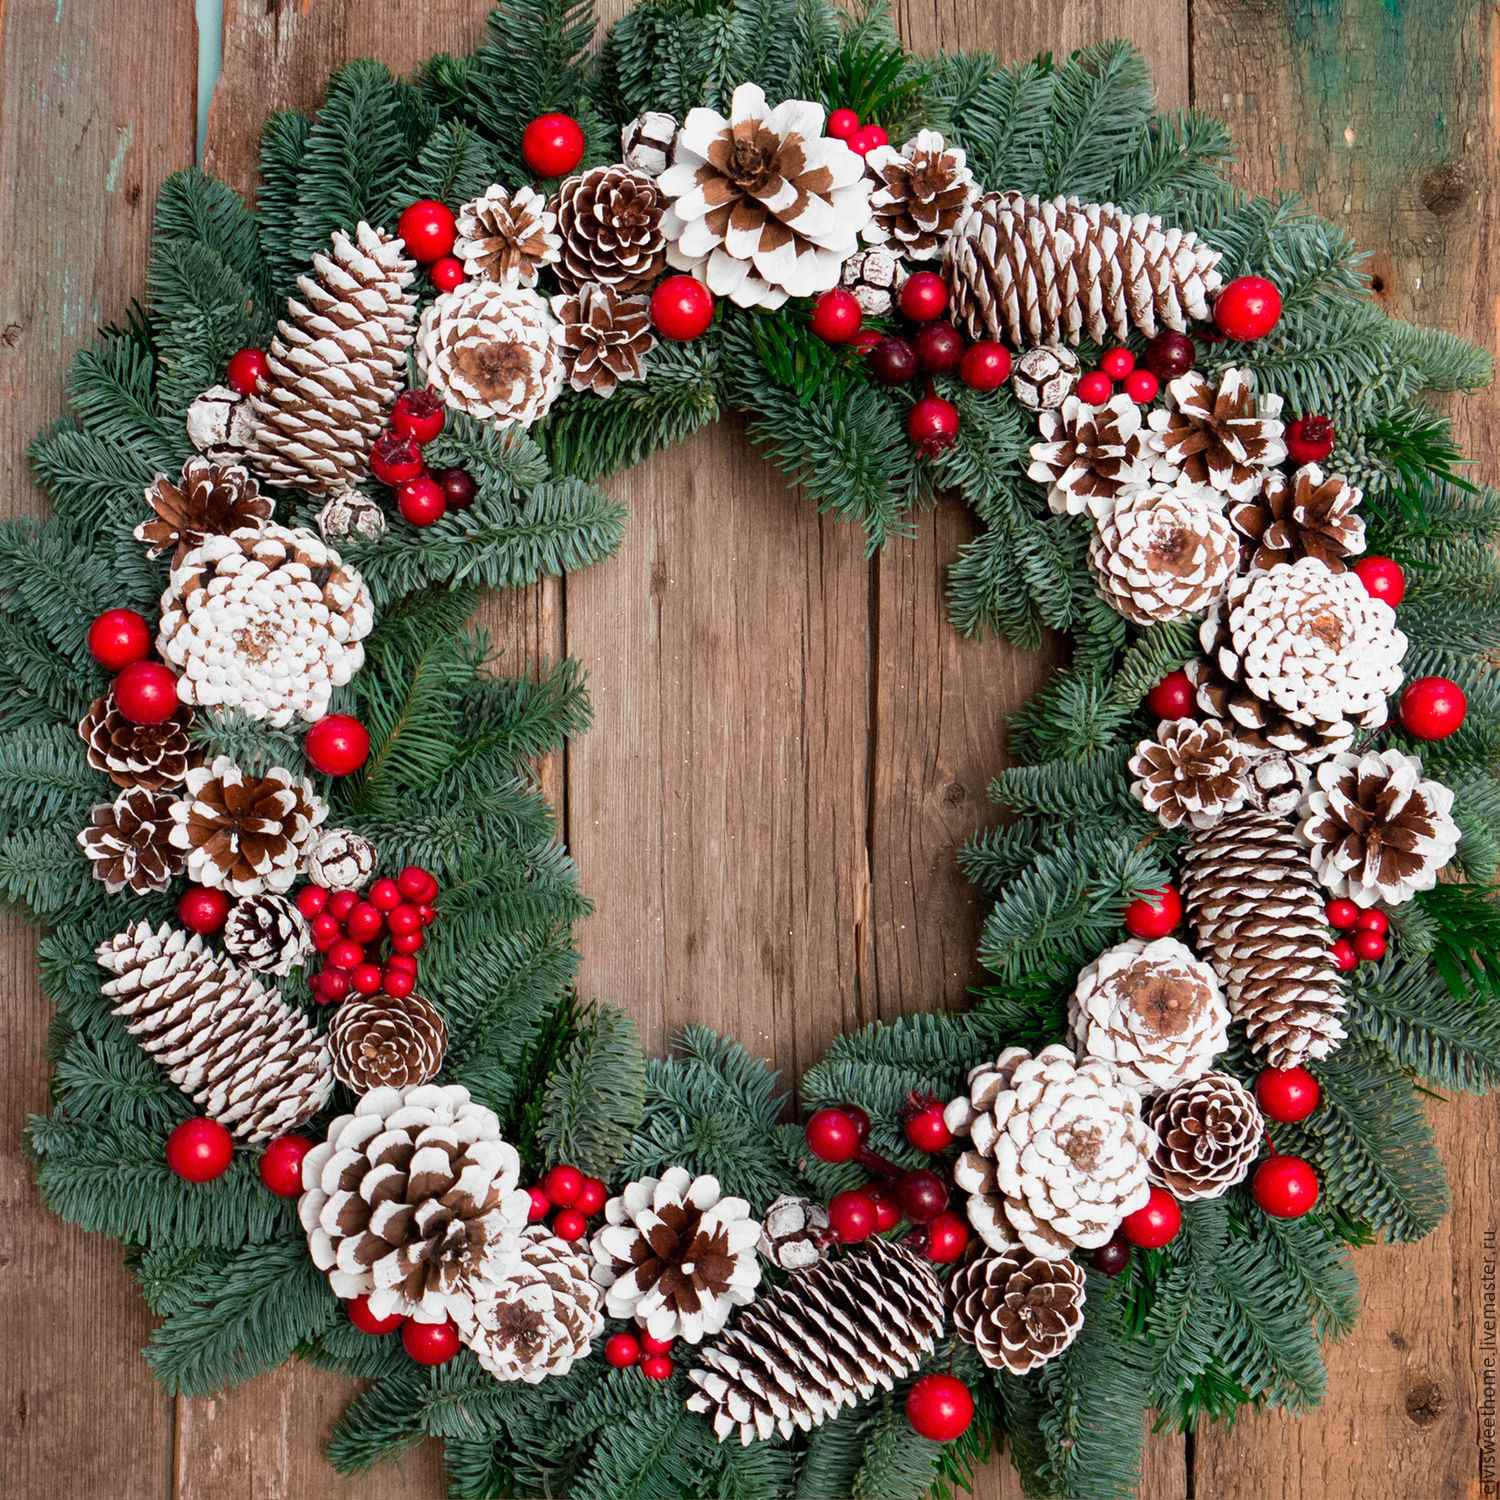 do-it-yourself version of the light style of the Christmas wreath